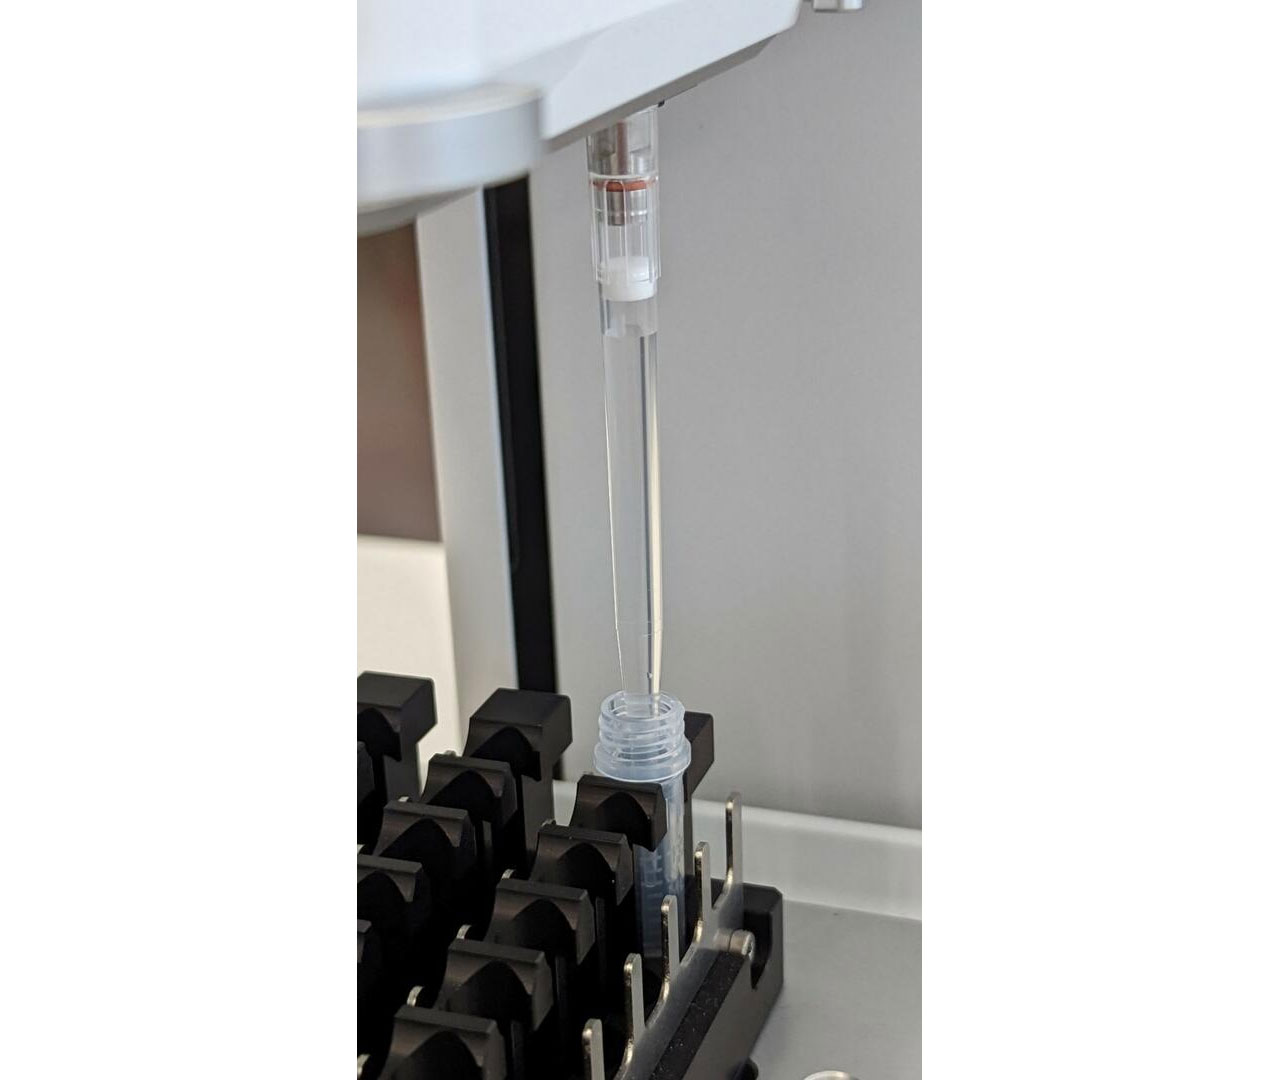 A close-up view of the ASSIST PLUS pipetting robot aliquoting reagent from a manufacturer’s tube with the D-ONE pipetting module.